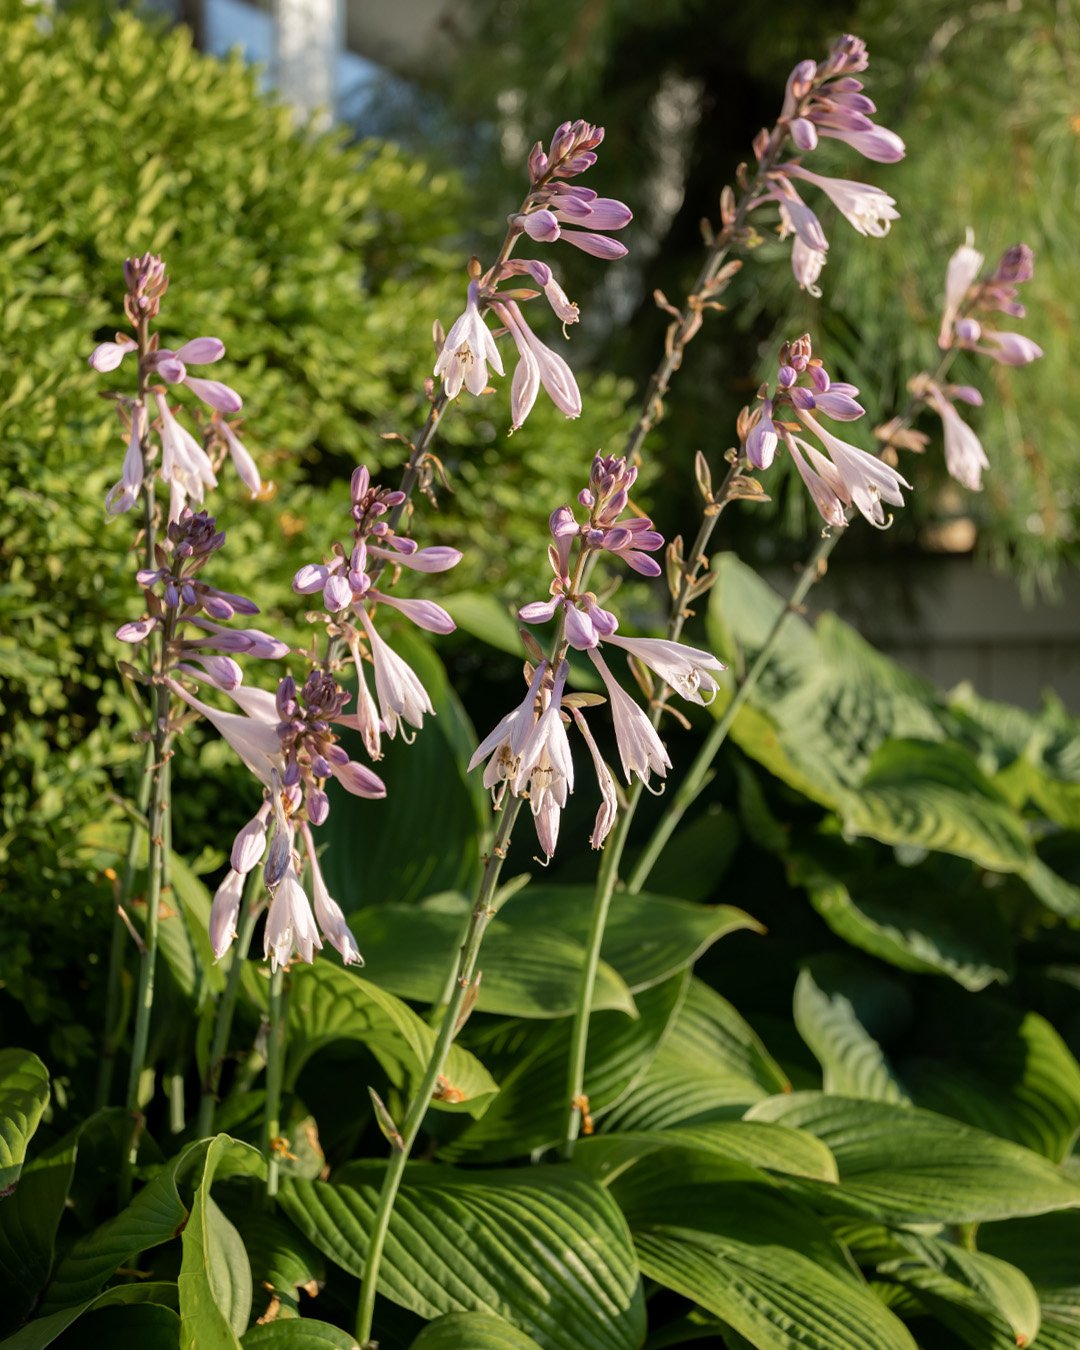 Hostas are easy, go-to plants for many people for perennials beds and general landscaping, but I see the same hosta mistakes happening over and over again. Here are some of the ones I see most frequently that are super quick and simple to fix.